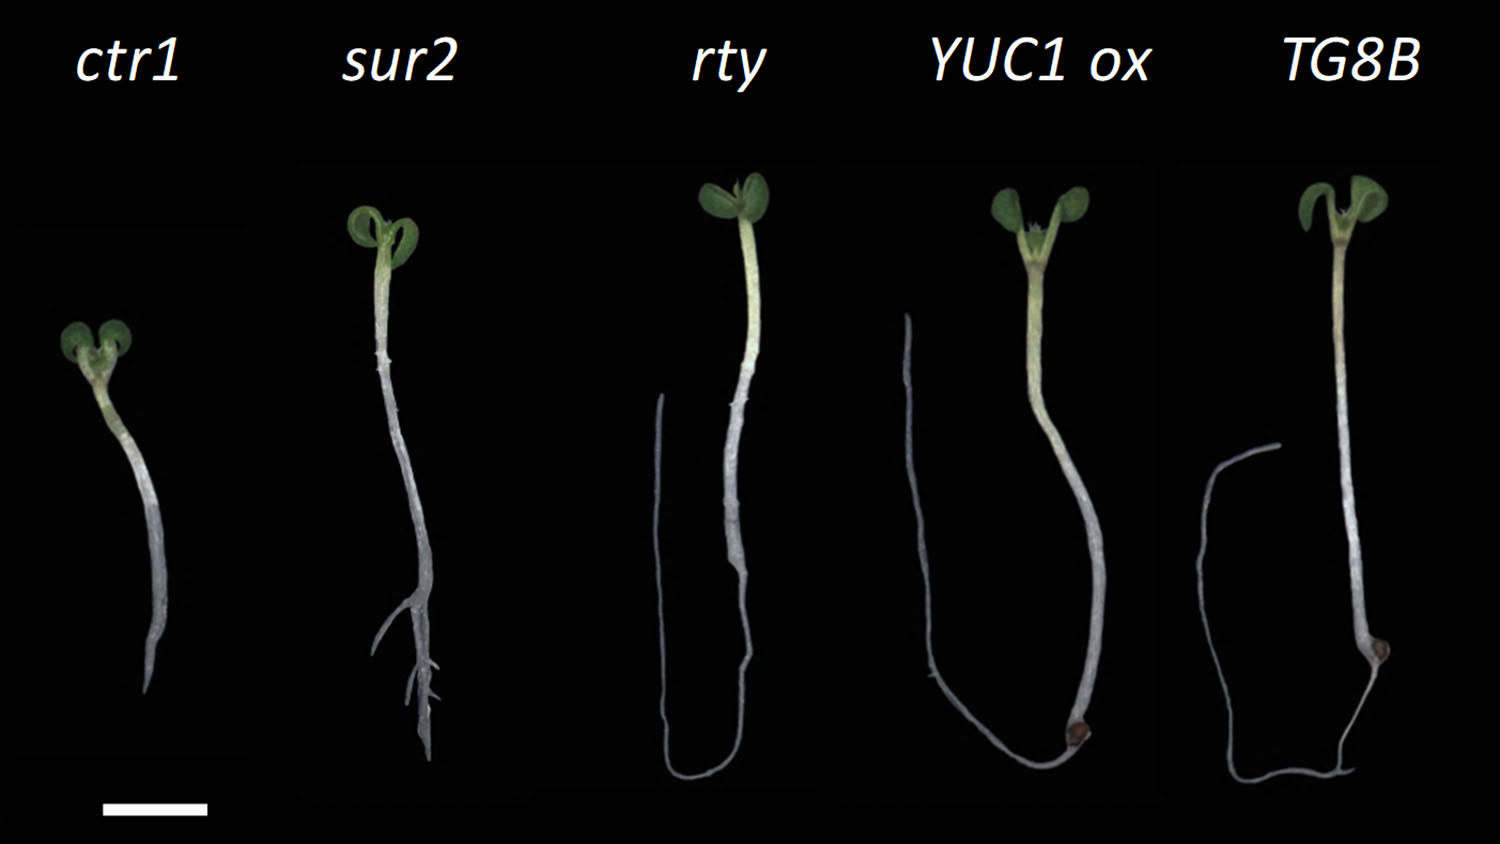 Seedlings with mutations in genes involved in making a plant growth hormone have curly cotyledons, the first two “leaves” of a plant shoot, or short roots. (Labeled seedlings on black)